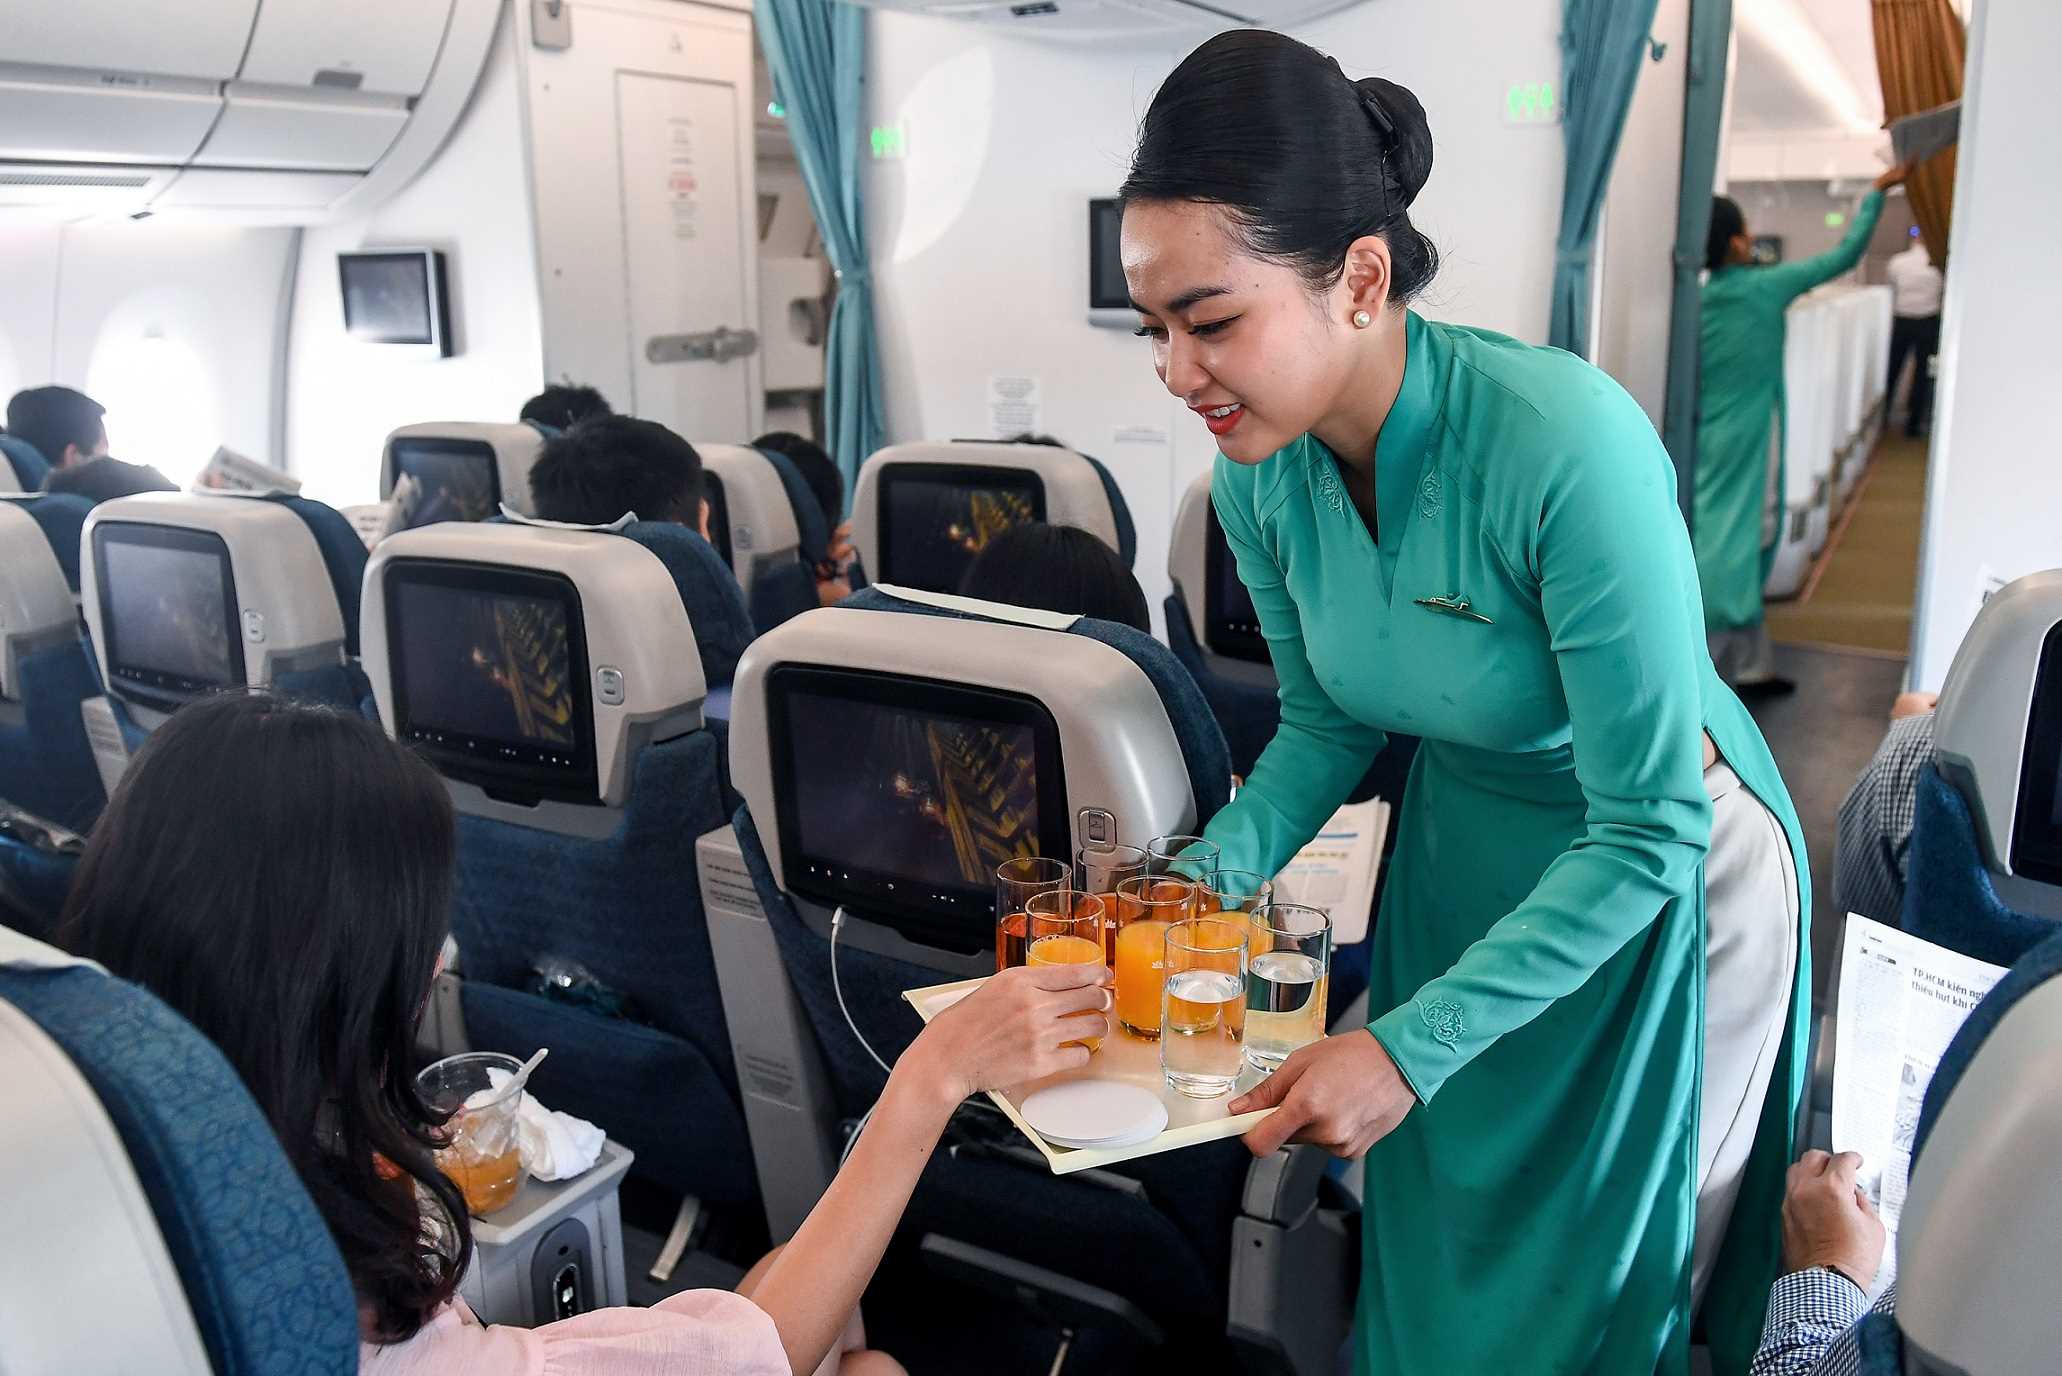 You can take advantage of the in-flight entertainment options available on Vietnam Airlines flights